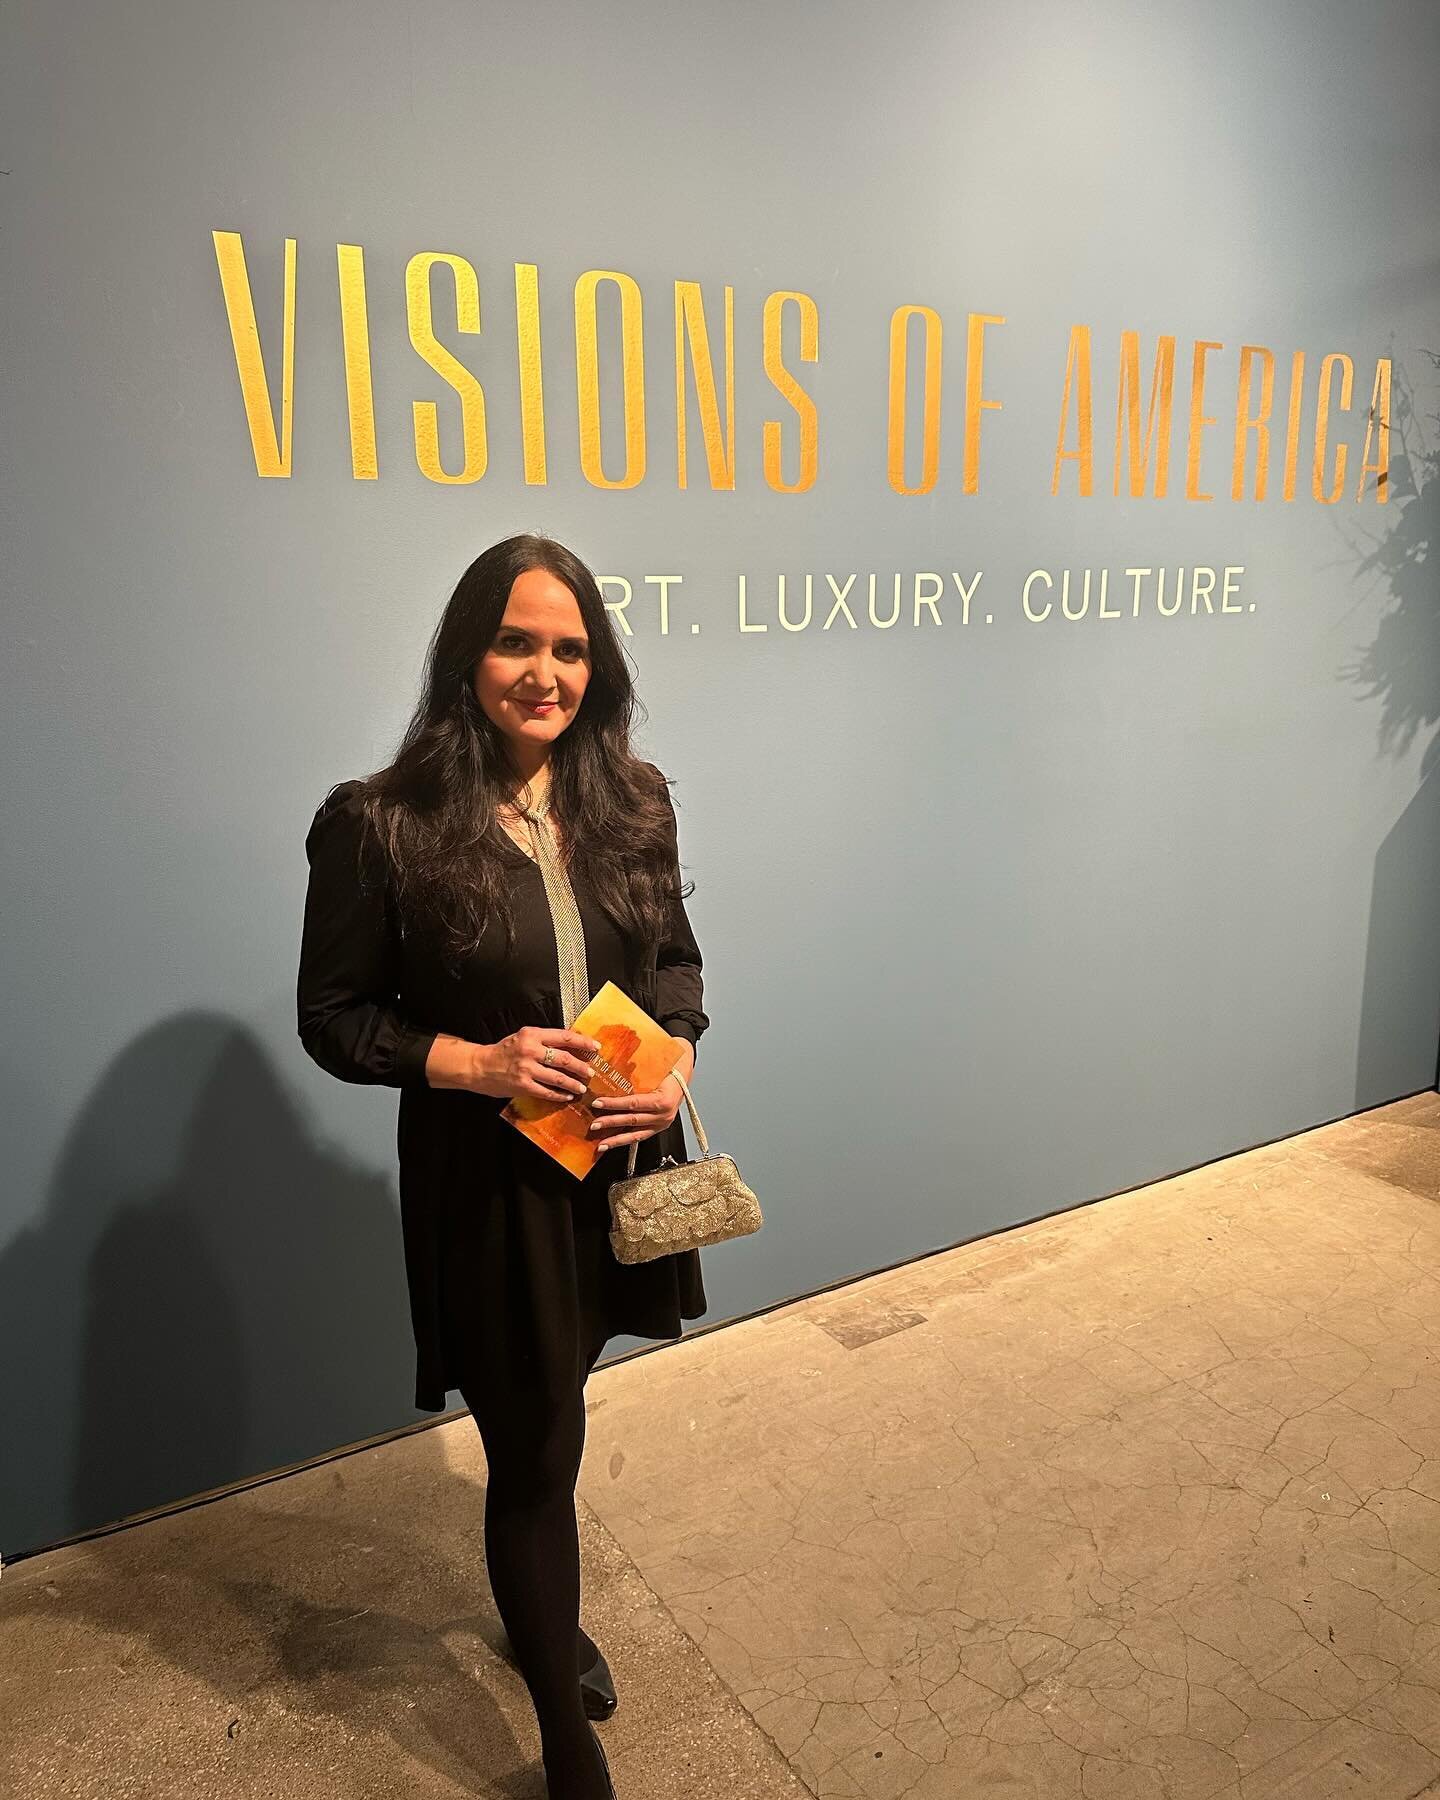 I had the opportunity to attend the opening night of my friend Corey Damen Jenkins &lsquo;s showcase exhibit &ldquo;Visions of America&rdquo; at Sotheby&rsquo;s in New York City. Also featured was American fashion designer Thom Browne and his selecti